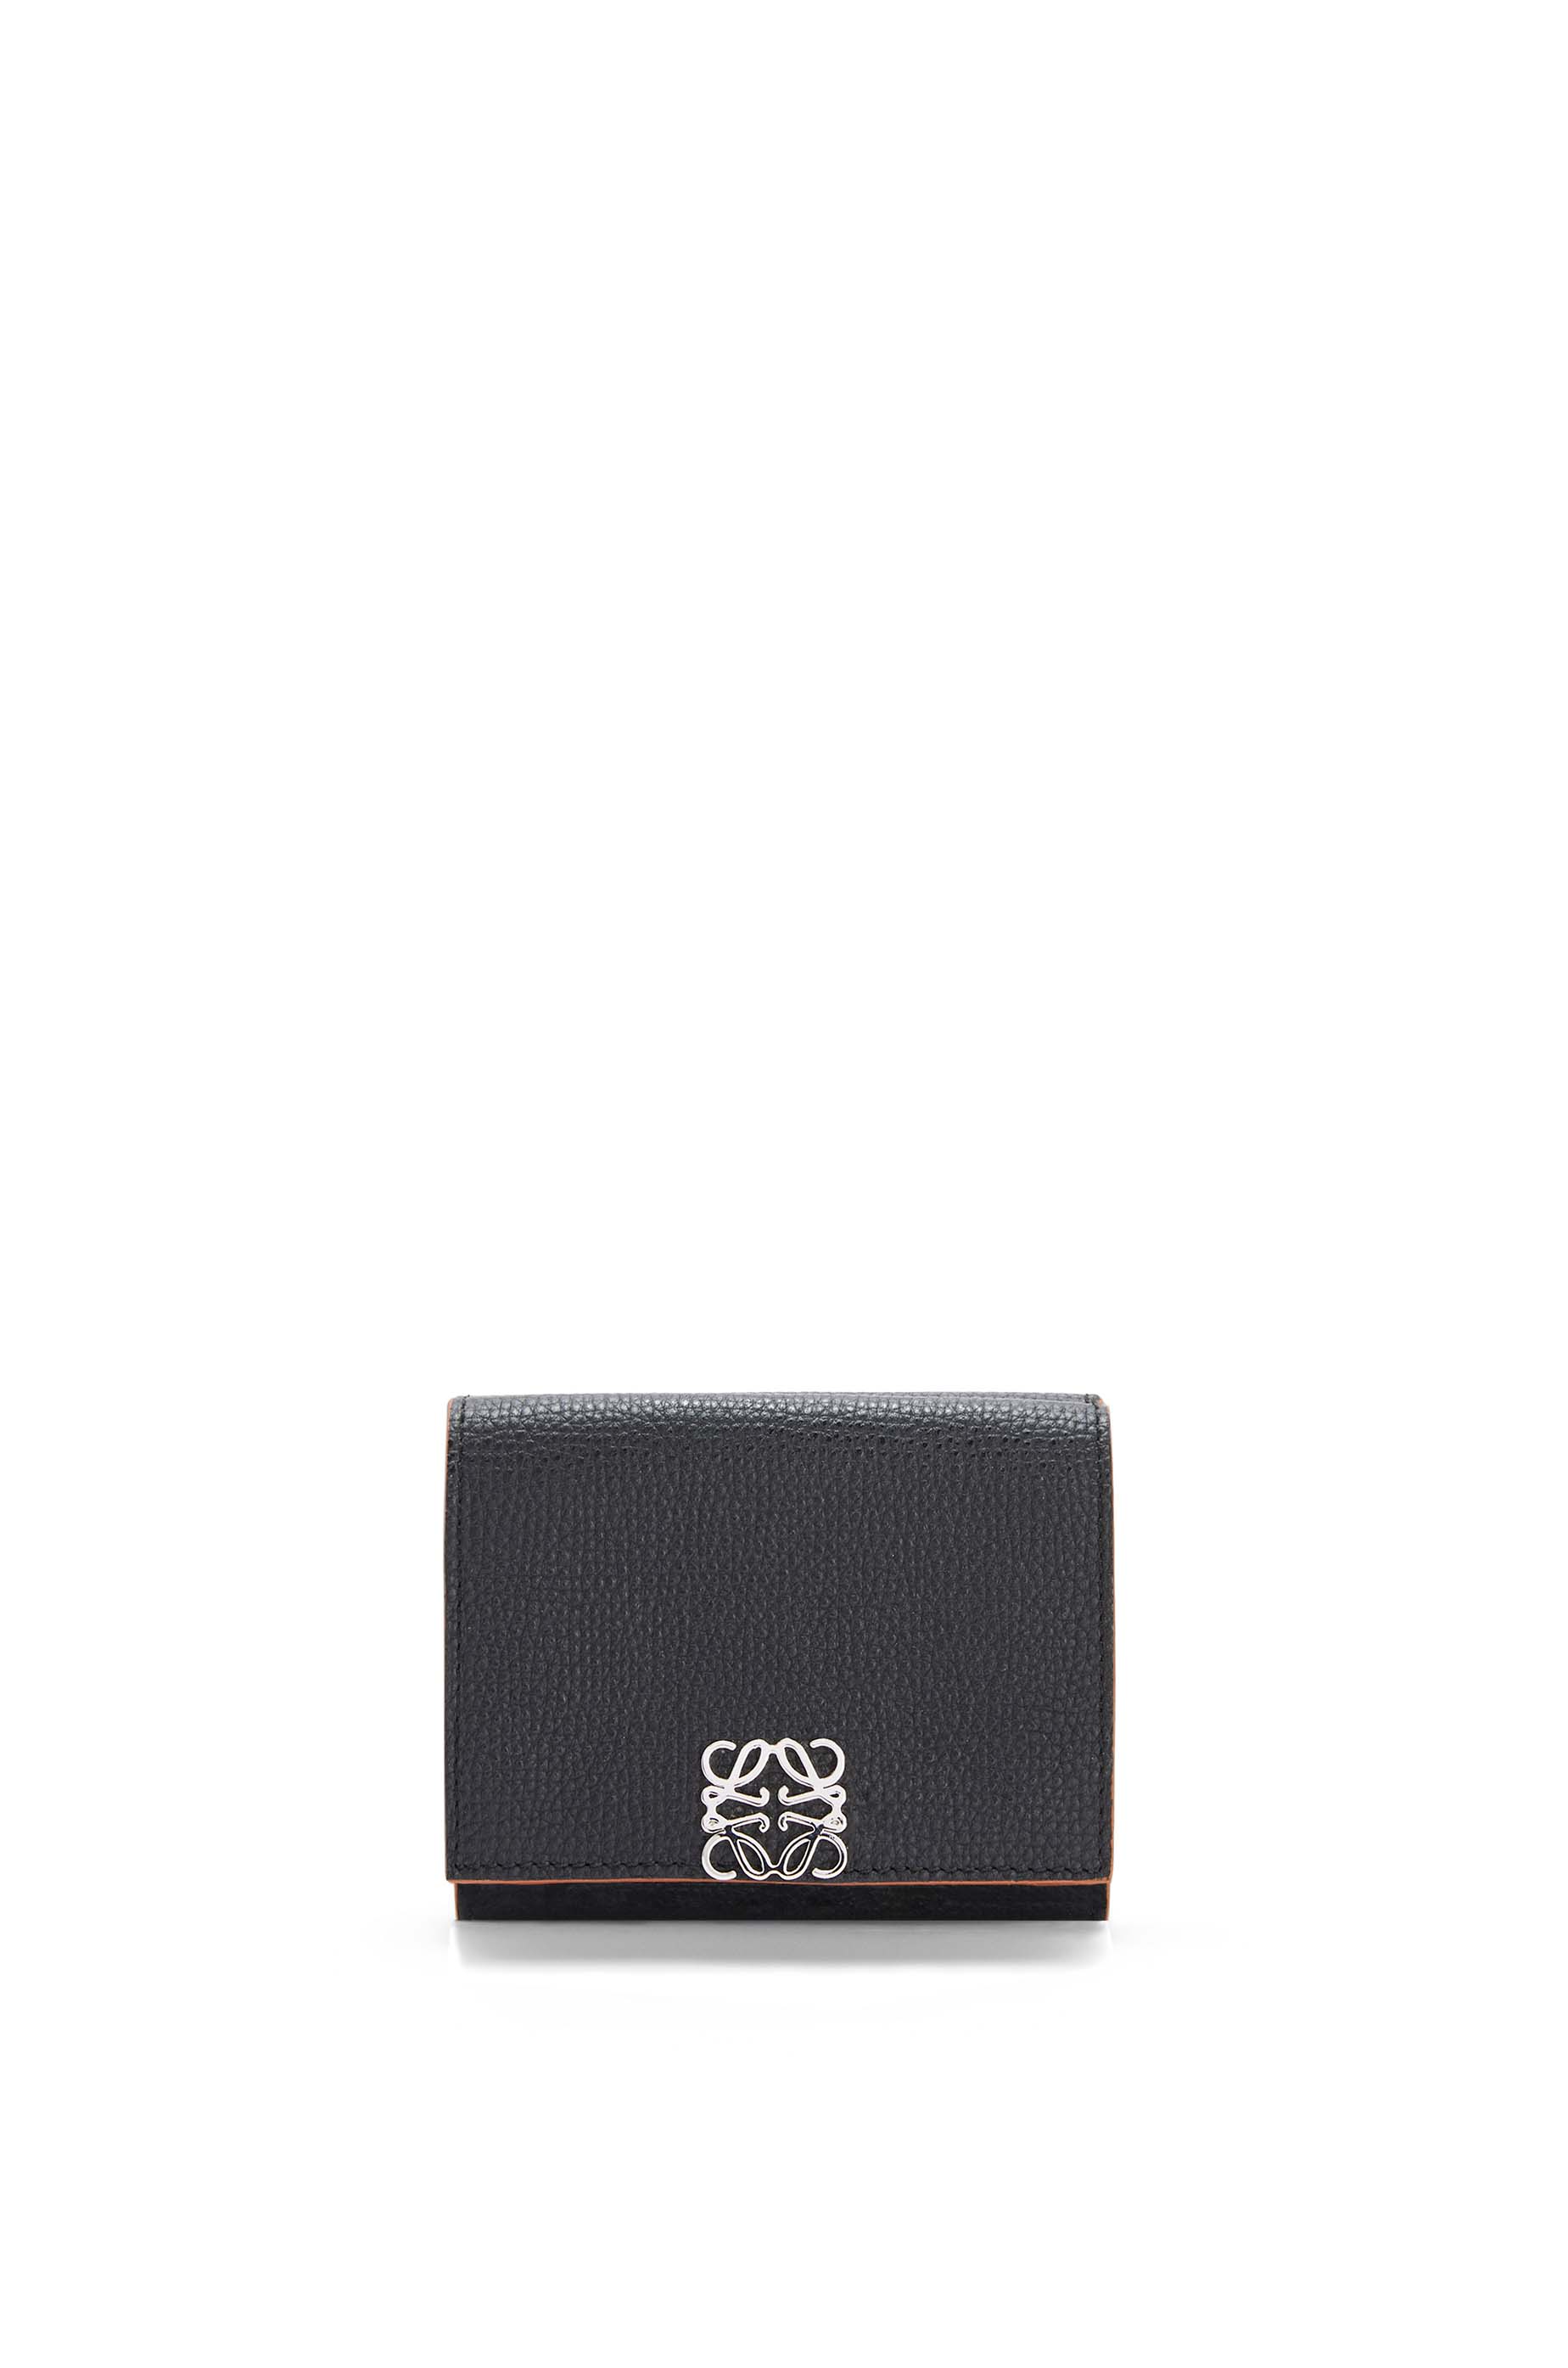 Luxury wallets & small leather goods for women